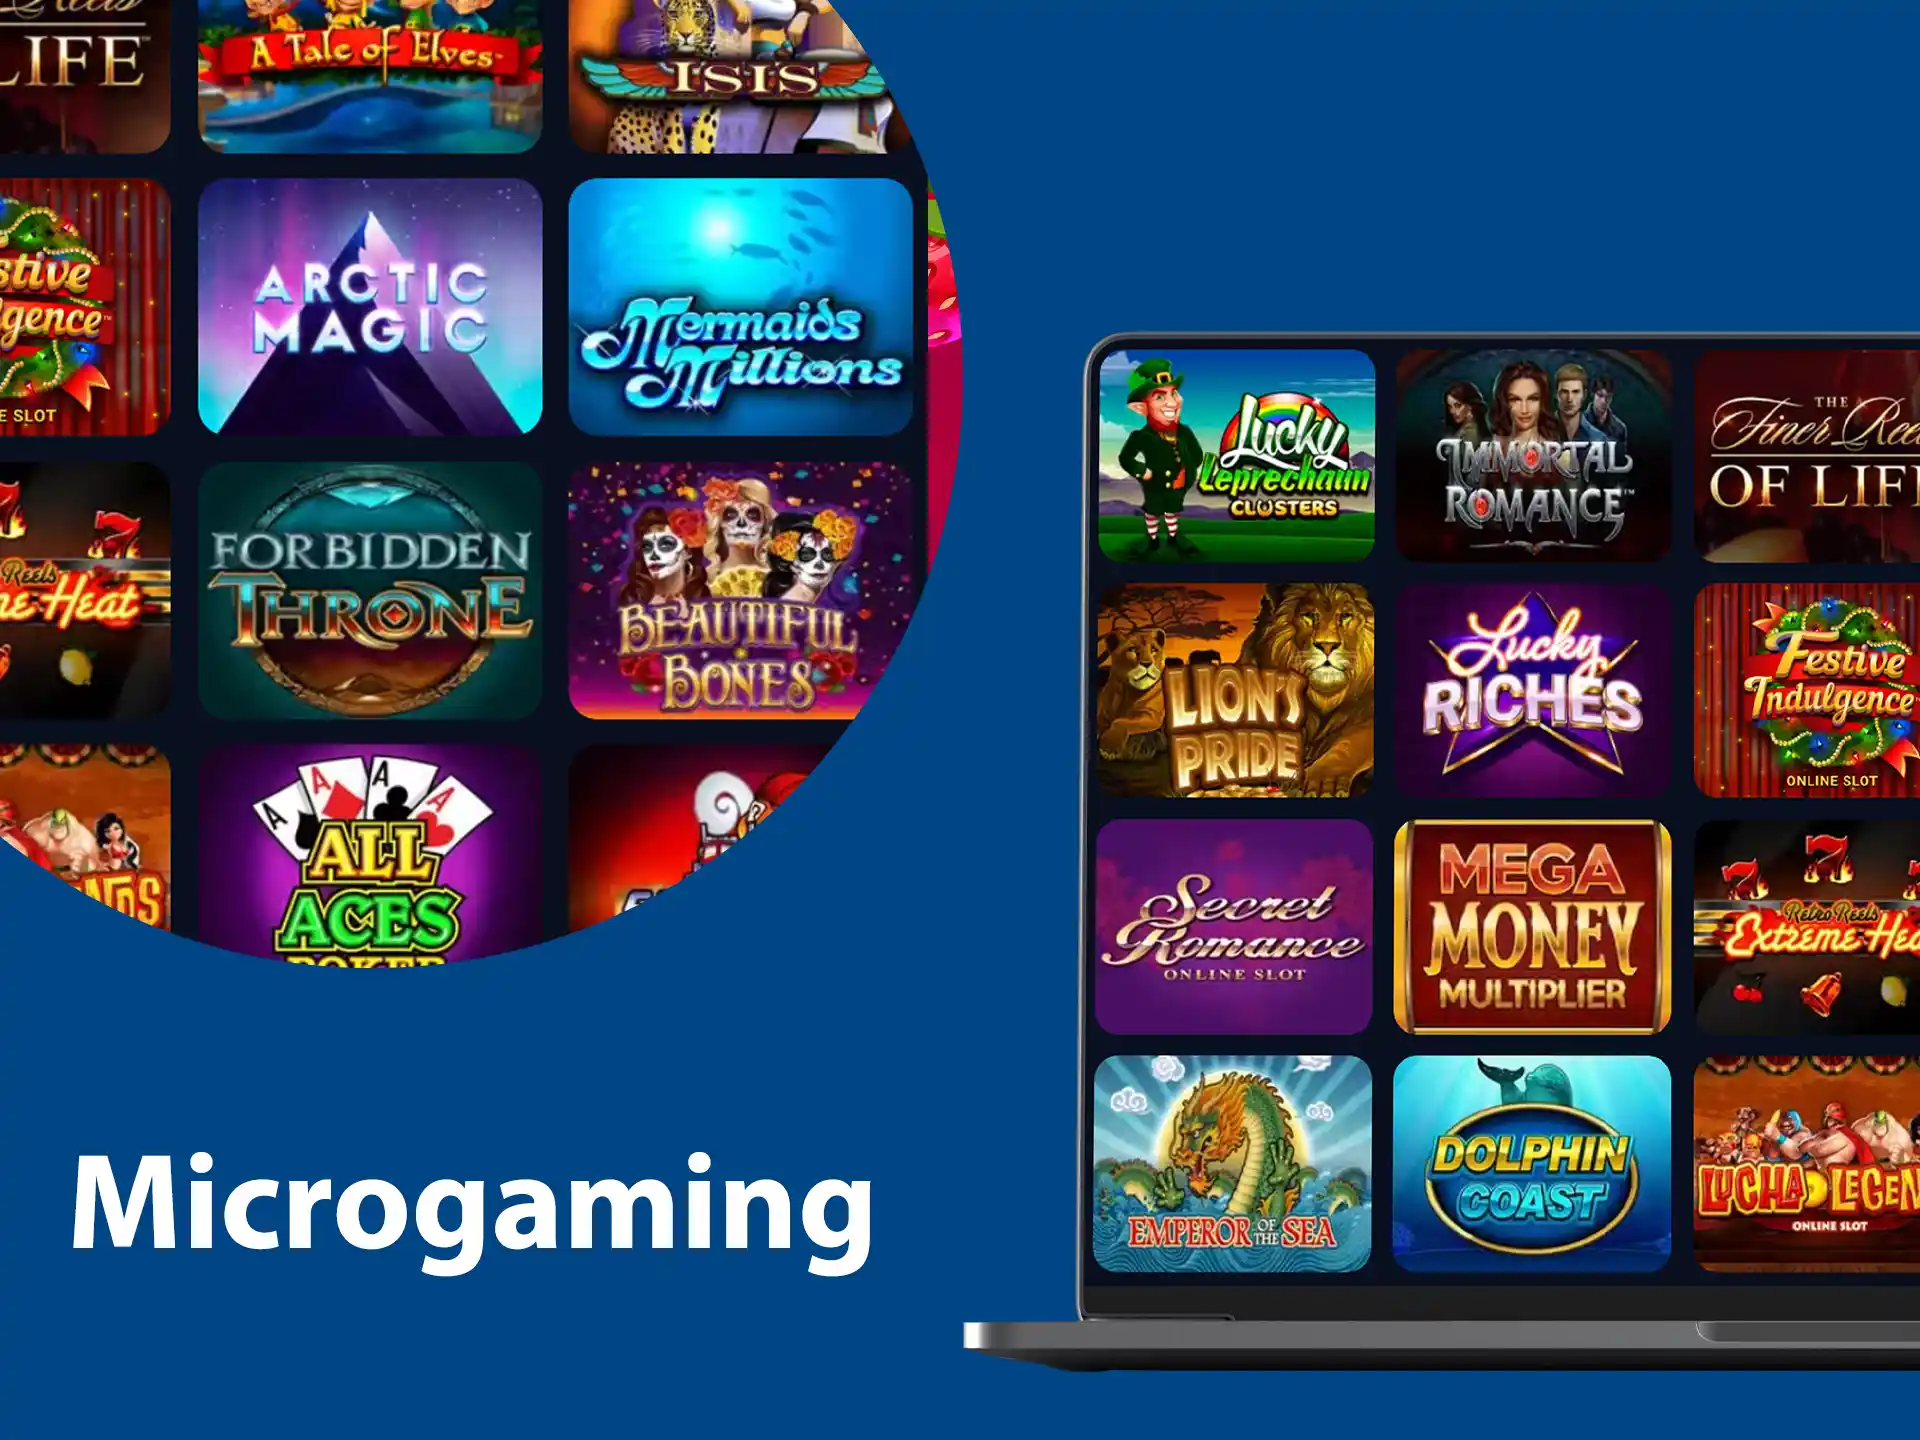 Microgaming has developed over 800 slots and has been operating since 1994.